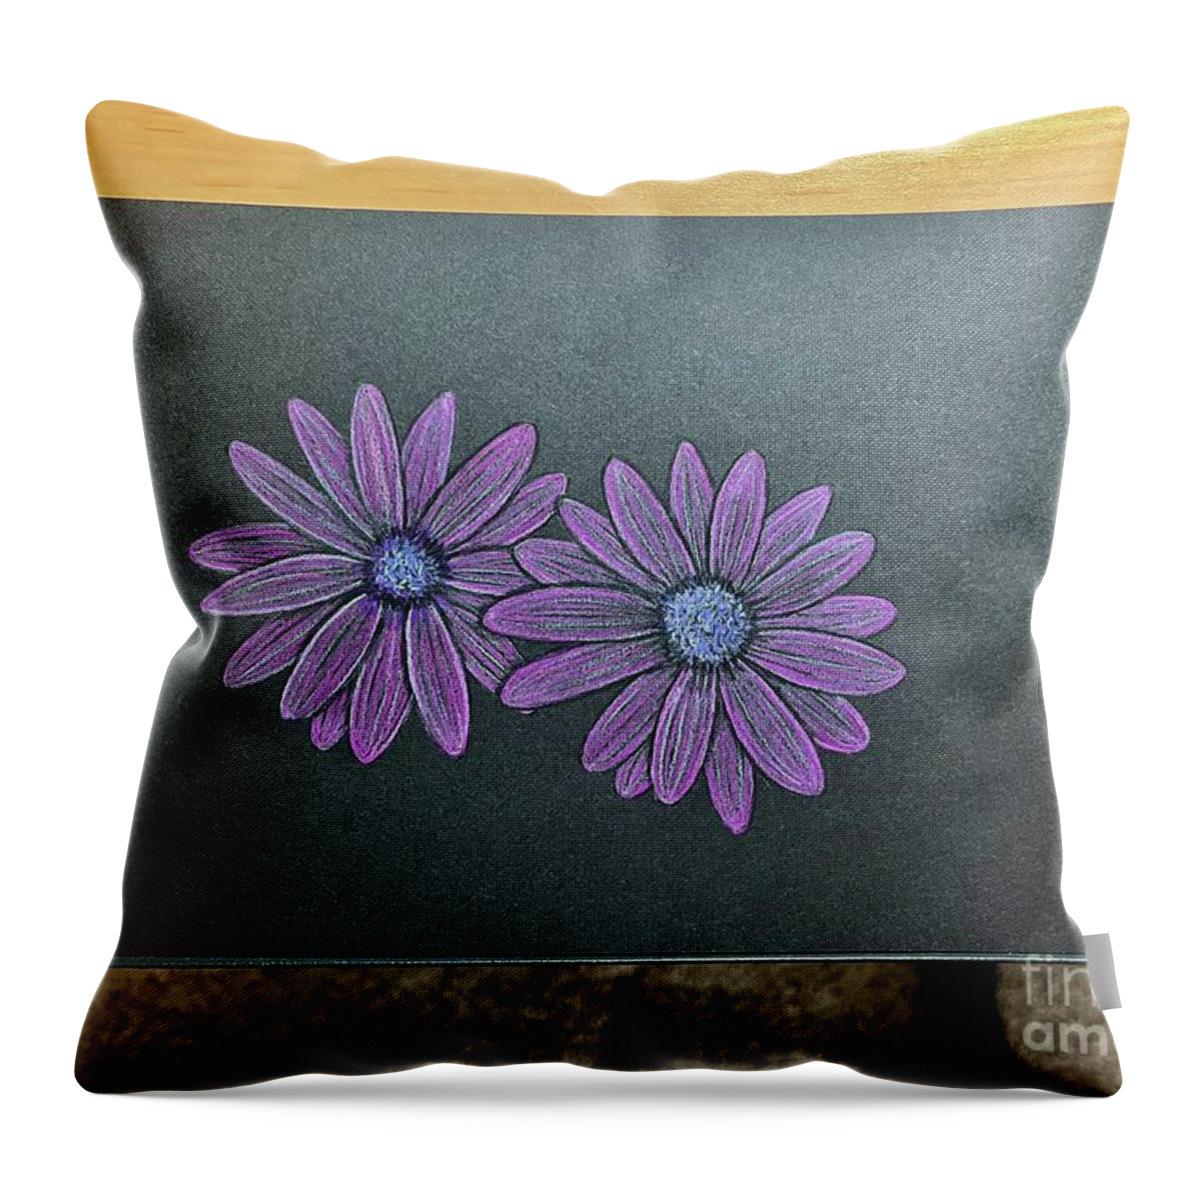  Throw Pillow featuring the digital art Practice Colored Pencil by Donna Mibus